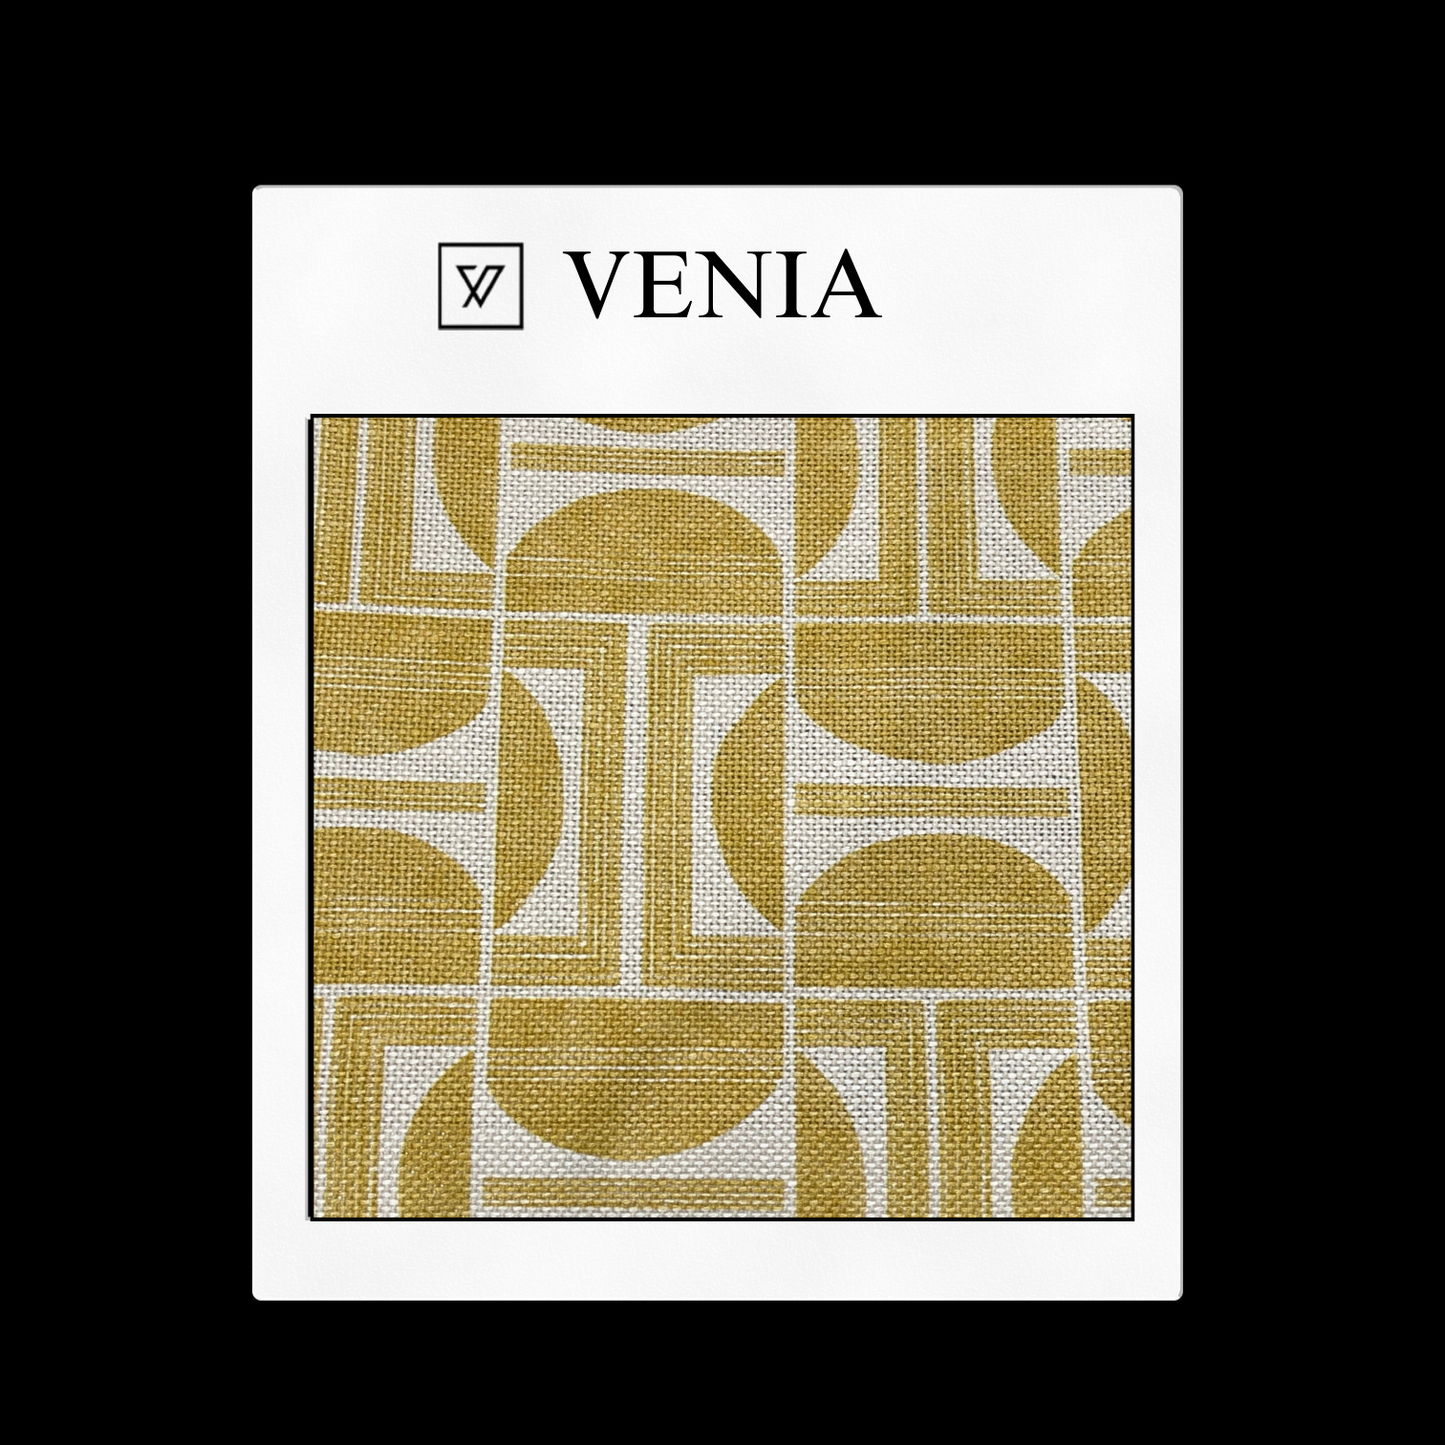 piece of curtain and upholstery fabric on a 'VENIA' monogrammed mockup